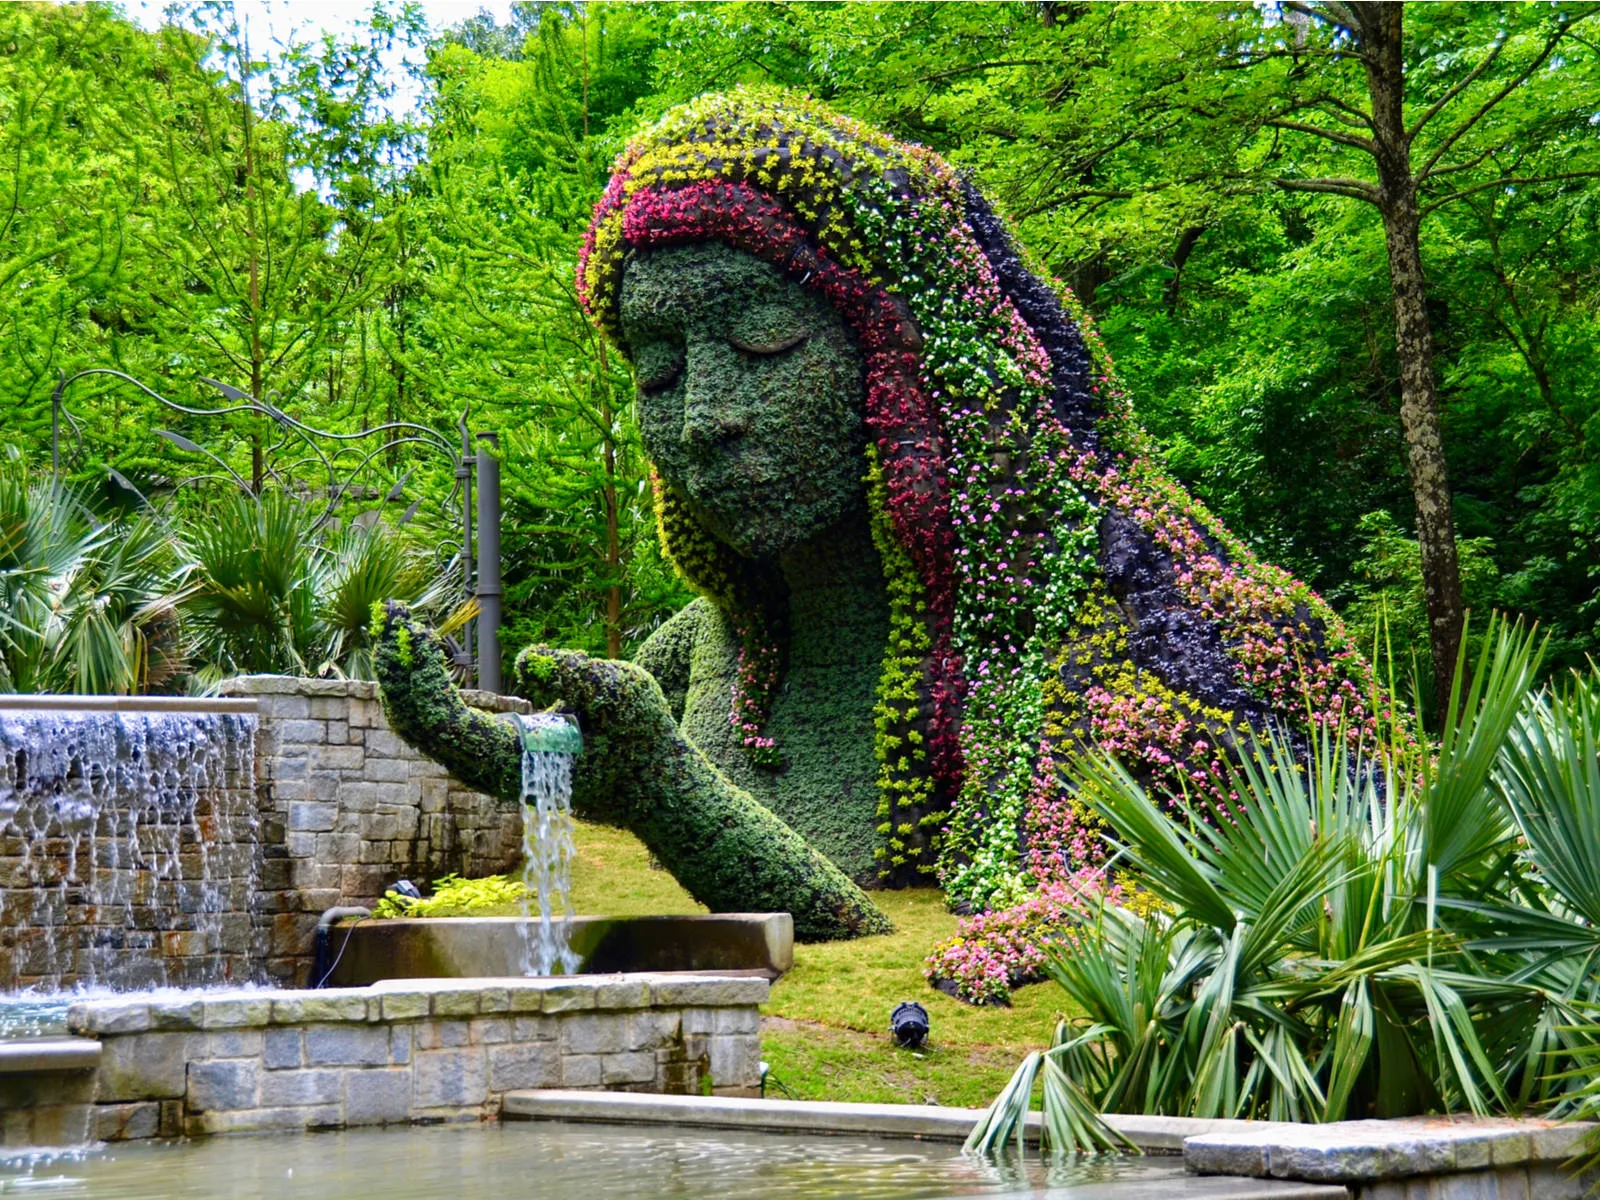 Earth Goddess sculpture holding a stream of water and decorated with various colored plants in Atlanta Botanical Garden, one of the most beautiful places in the US